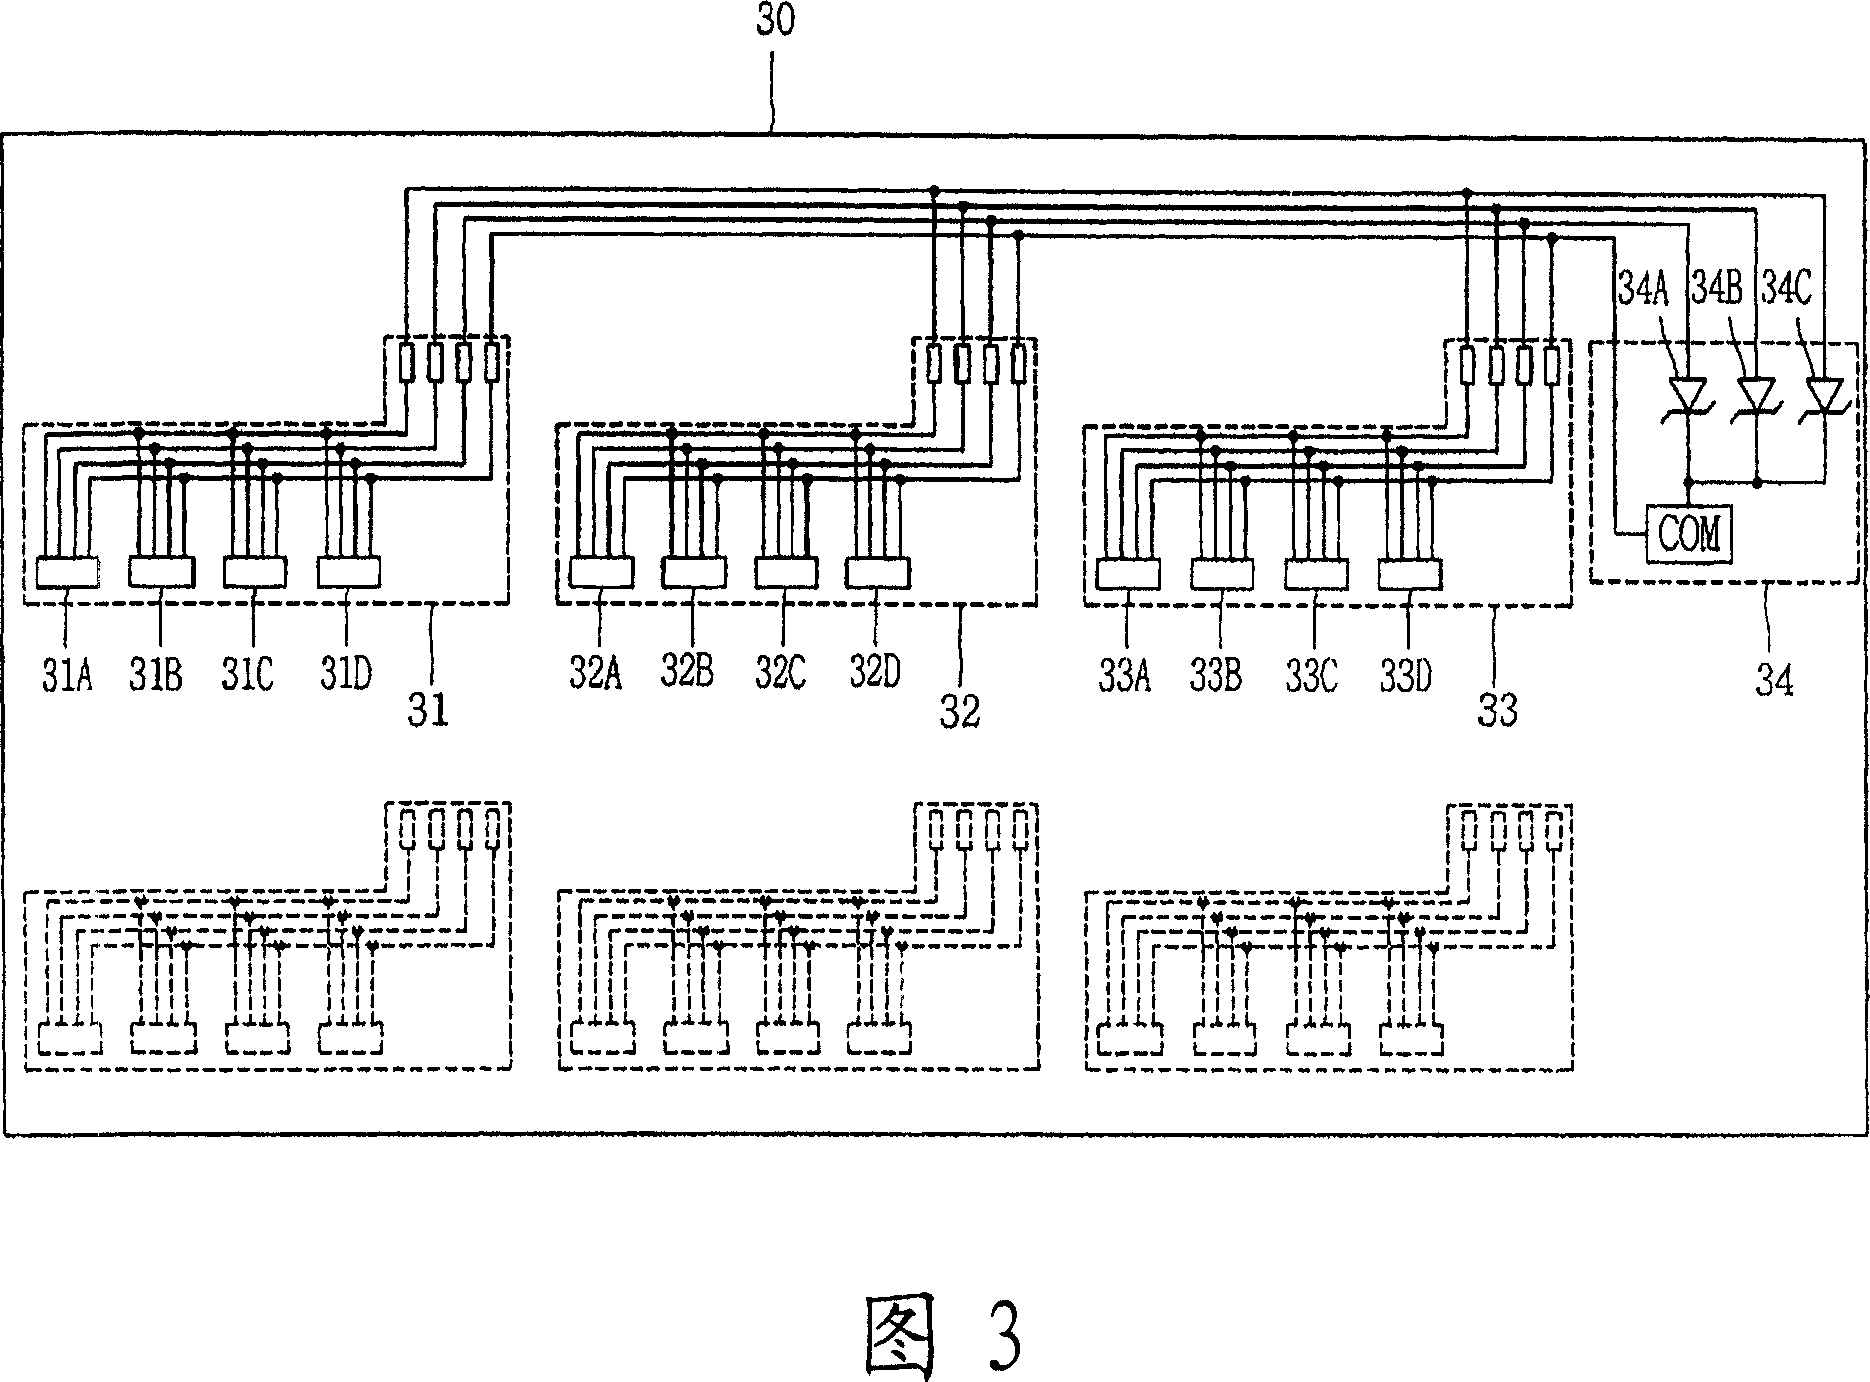 Electrostatic discharge preventing apparatus for light emitting diodes for backlighting